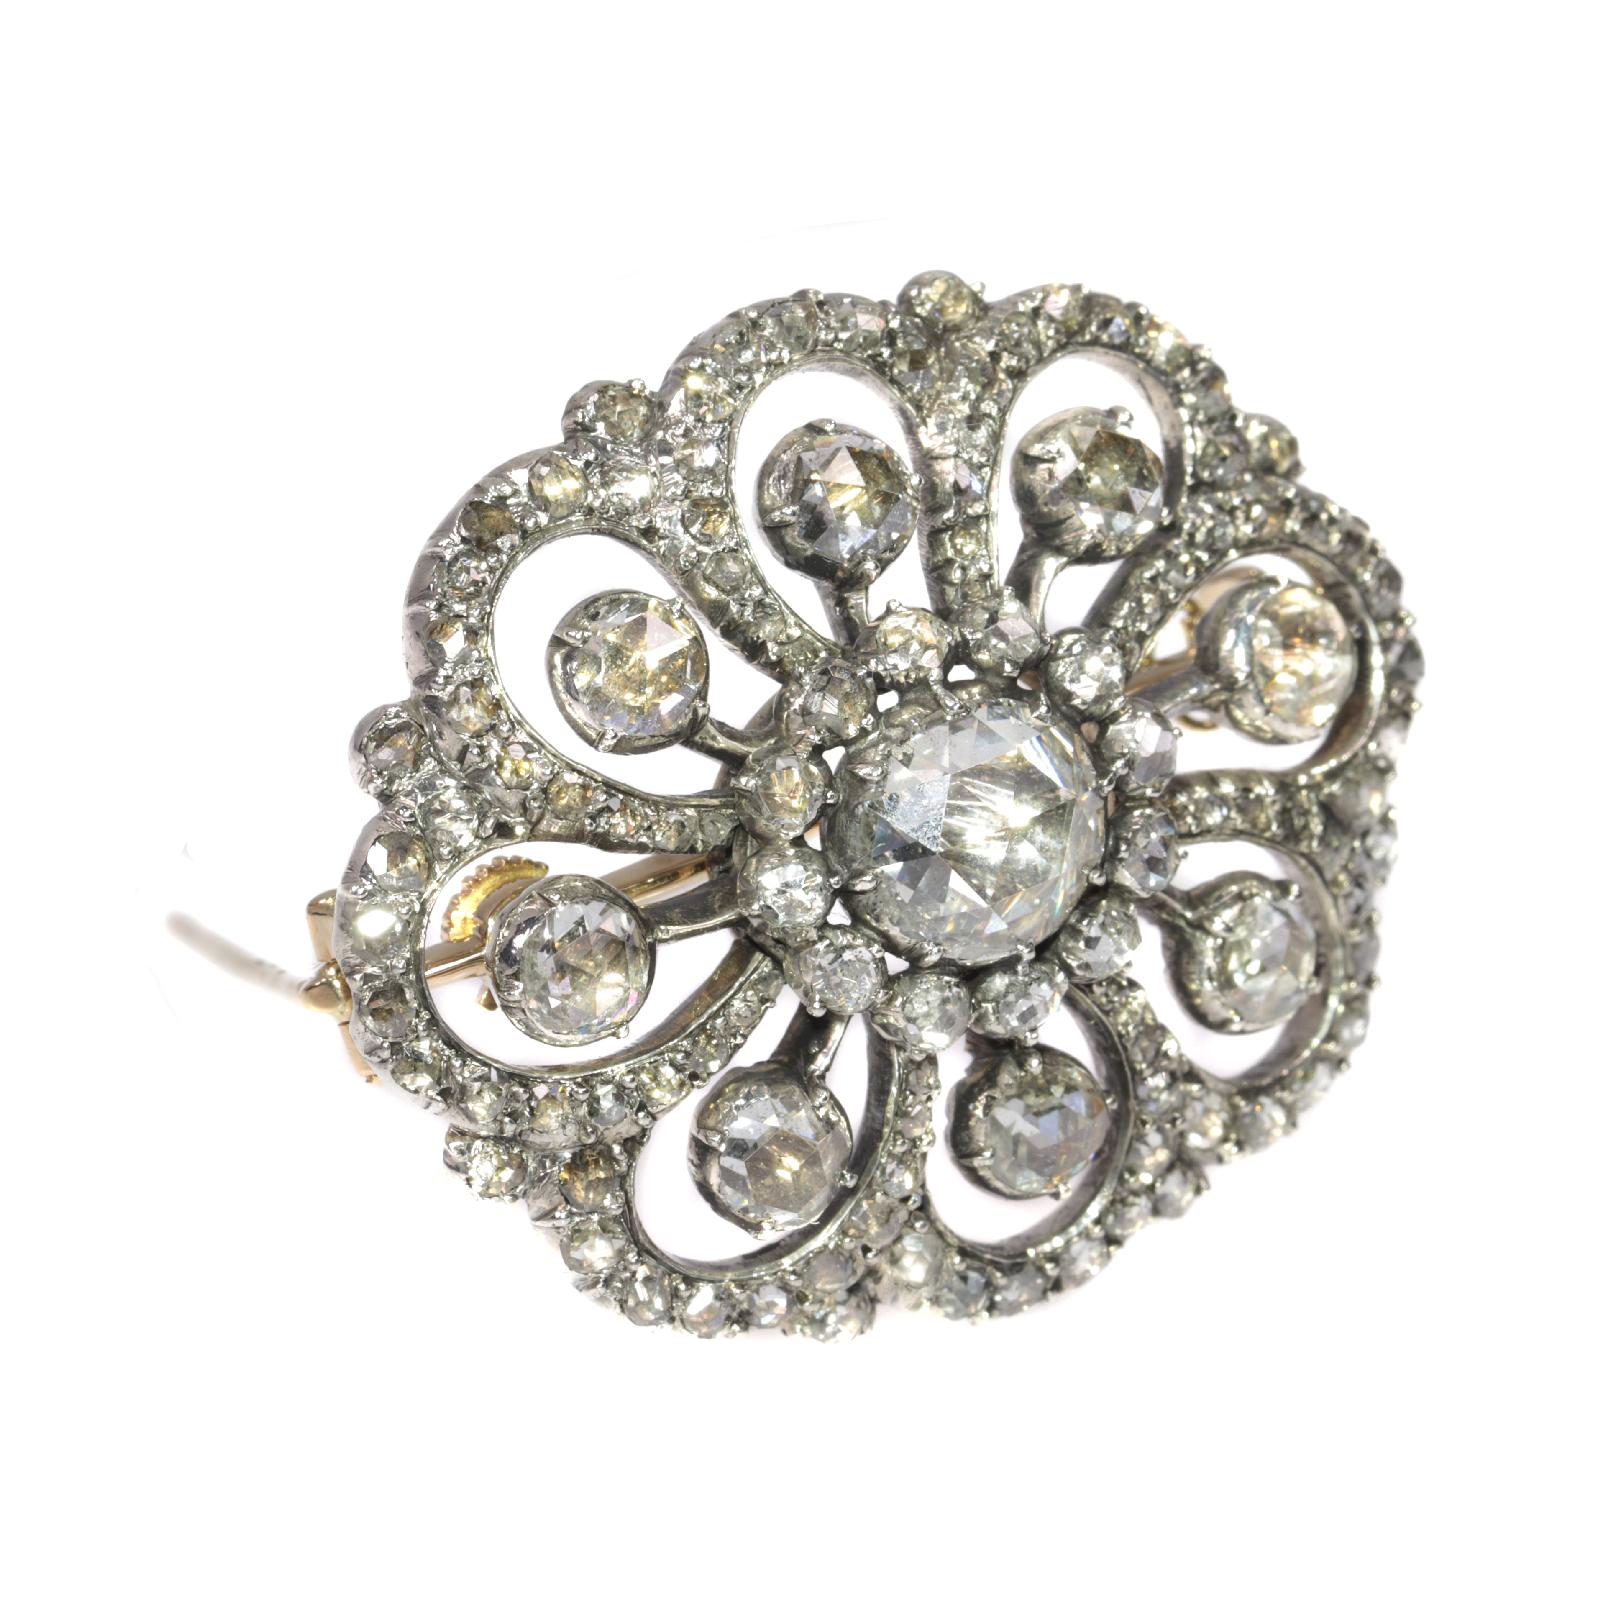 Typical Dutch Antique Rose Cut Diamond Jewel Brooch, 1860s In Excellent Condition For Sale In Antwerp, BE